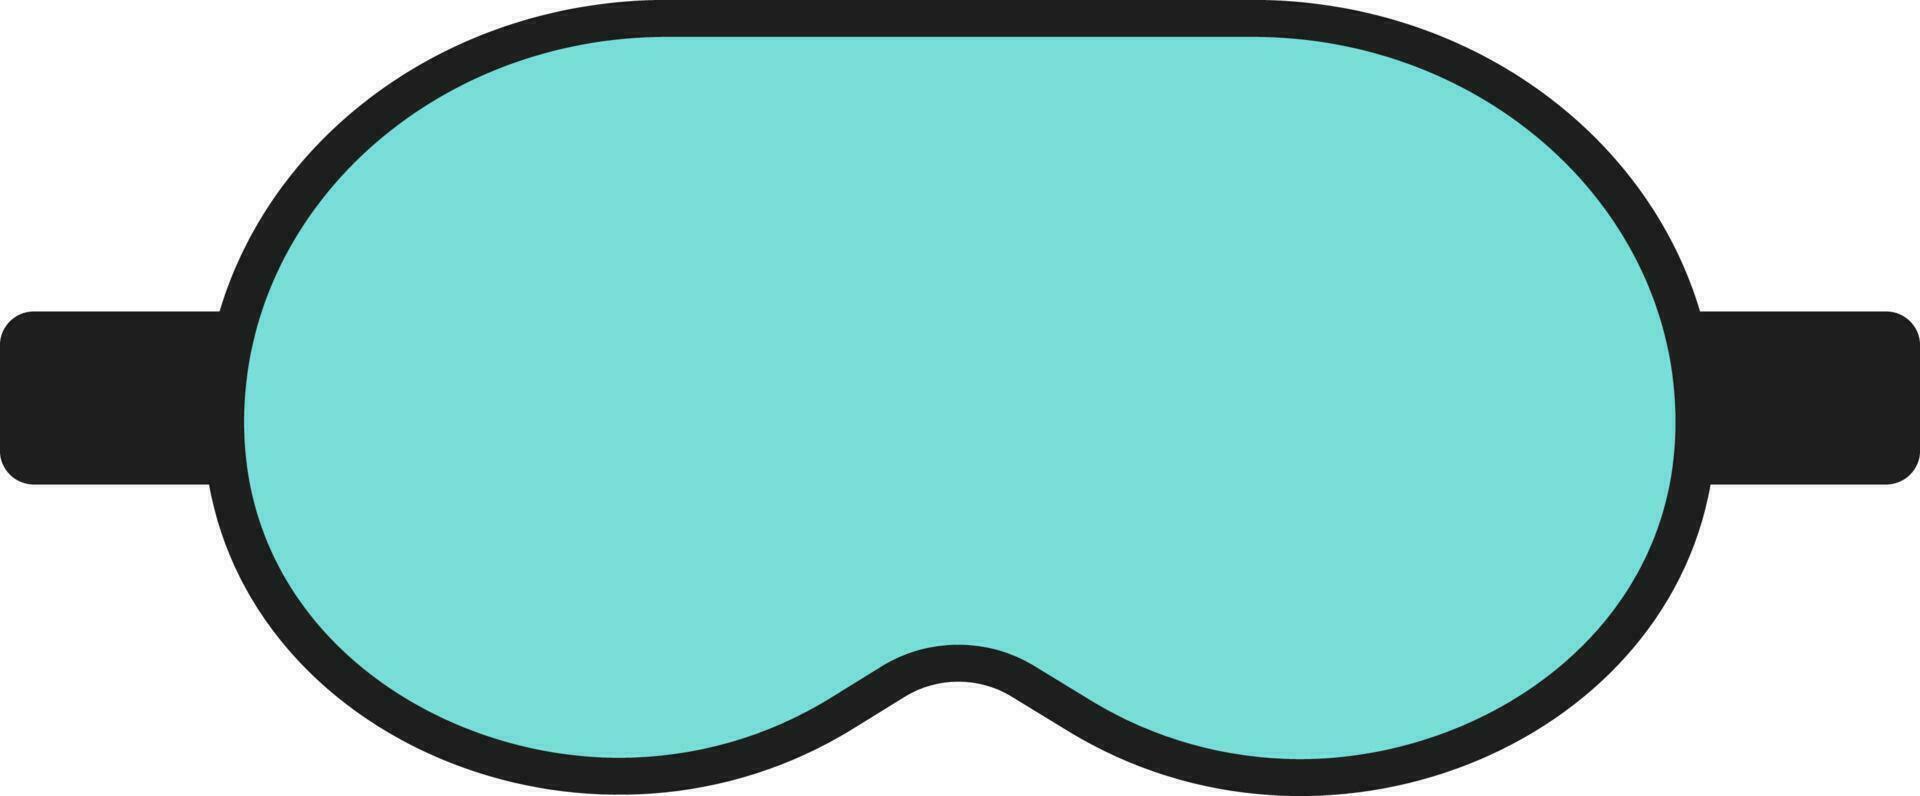 Blue And Black Glasses Icon In Flat Style. vector